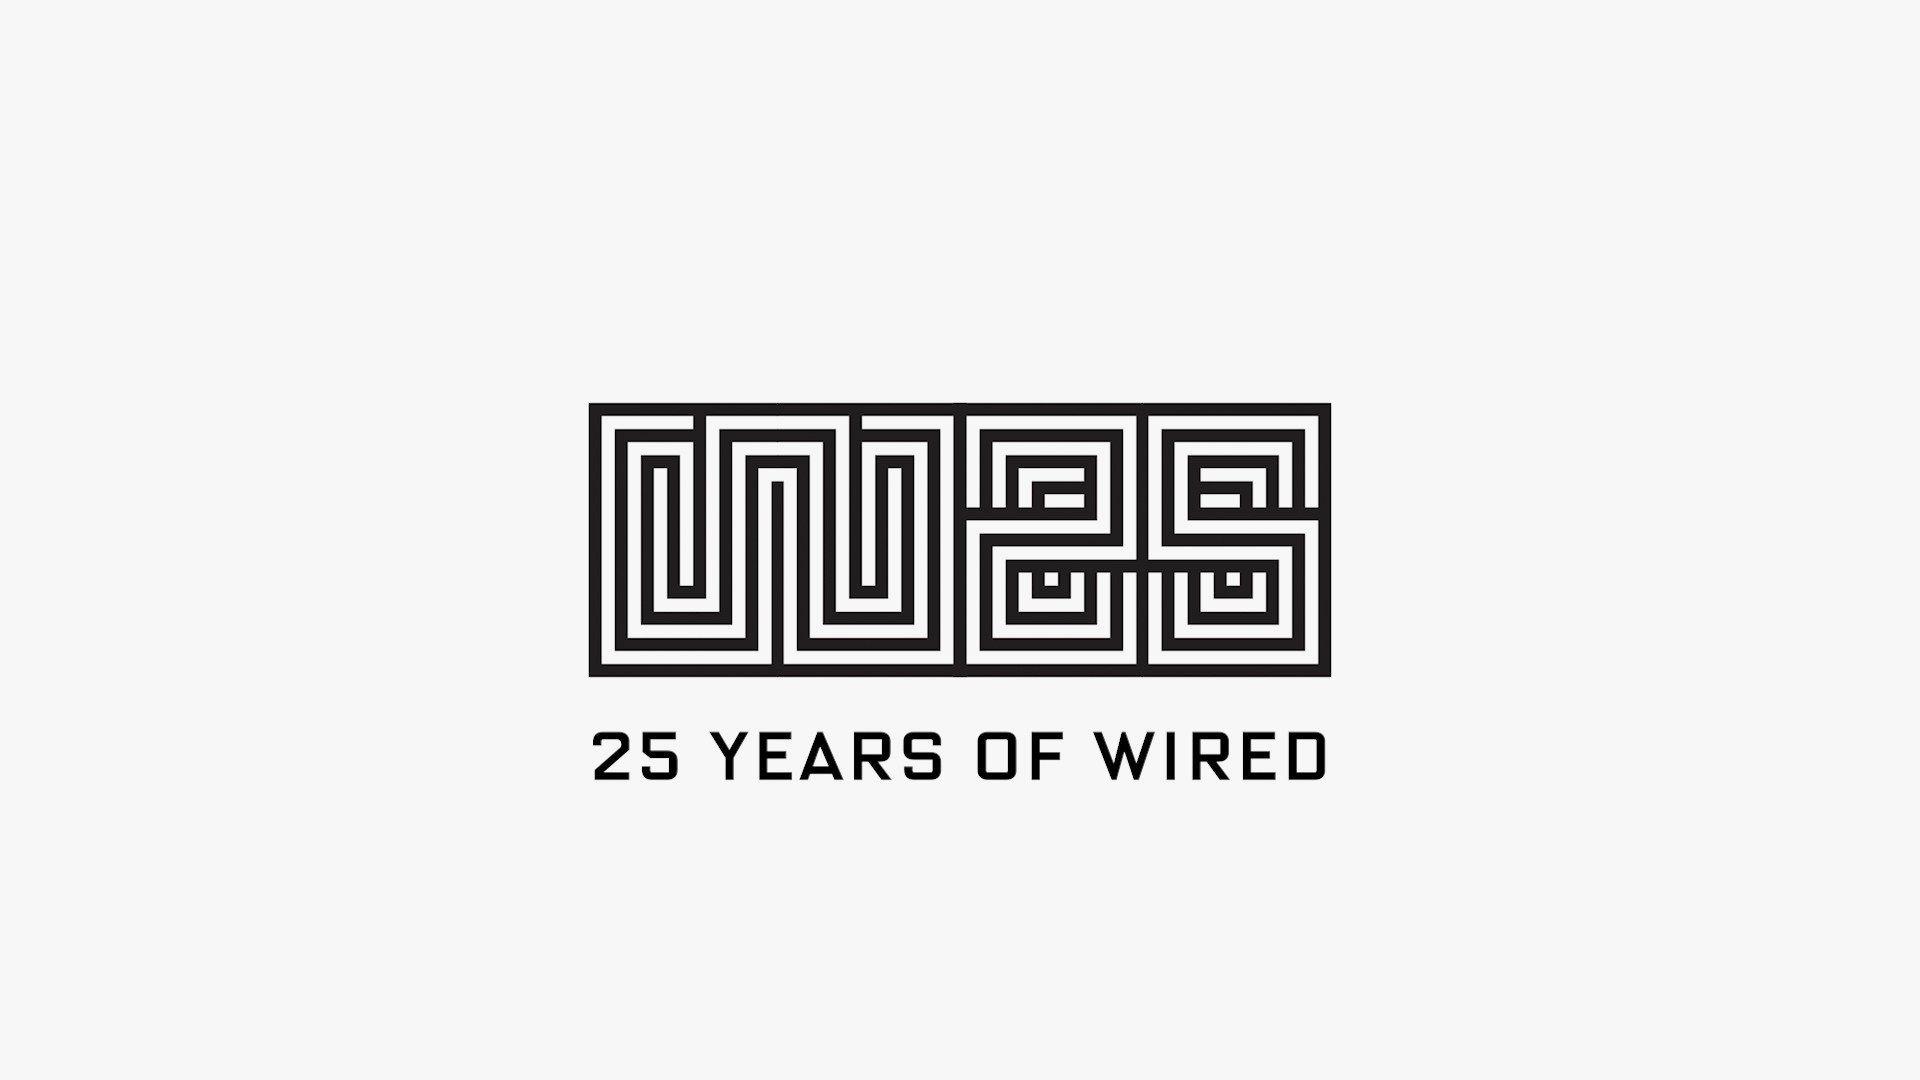 Wired.com Logo - WIRED25: How to Join WIRED's 25th Anniversary Celebration | WIRED